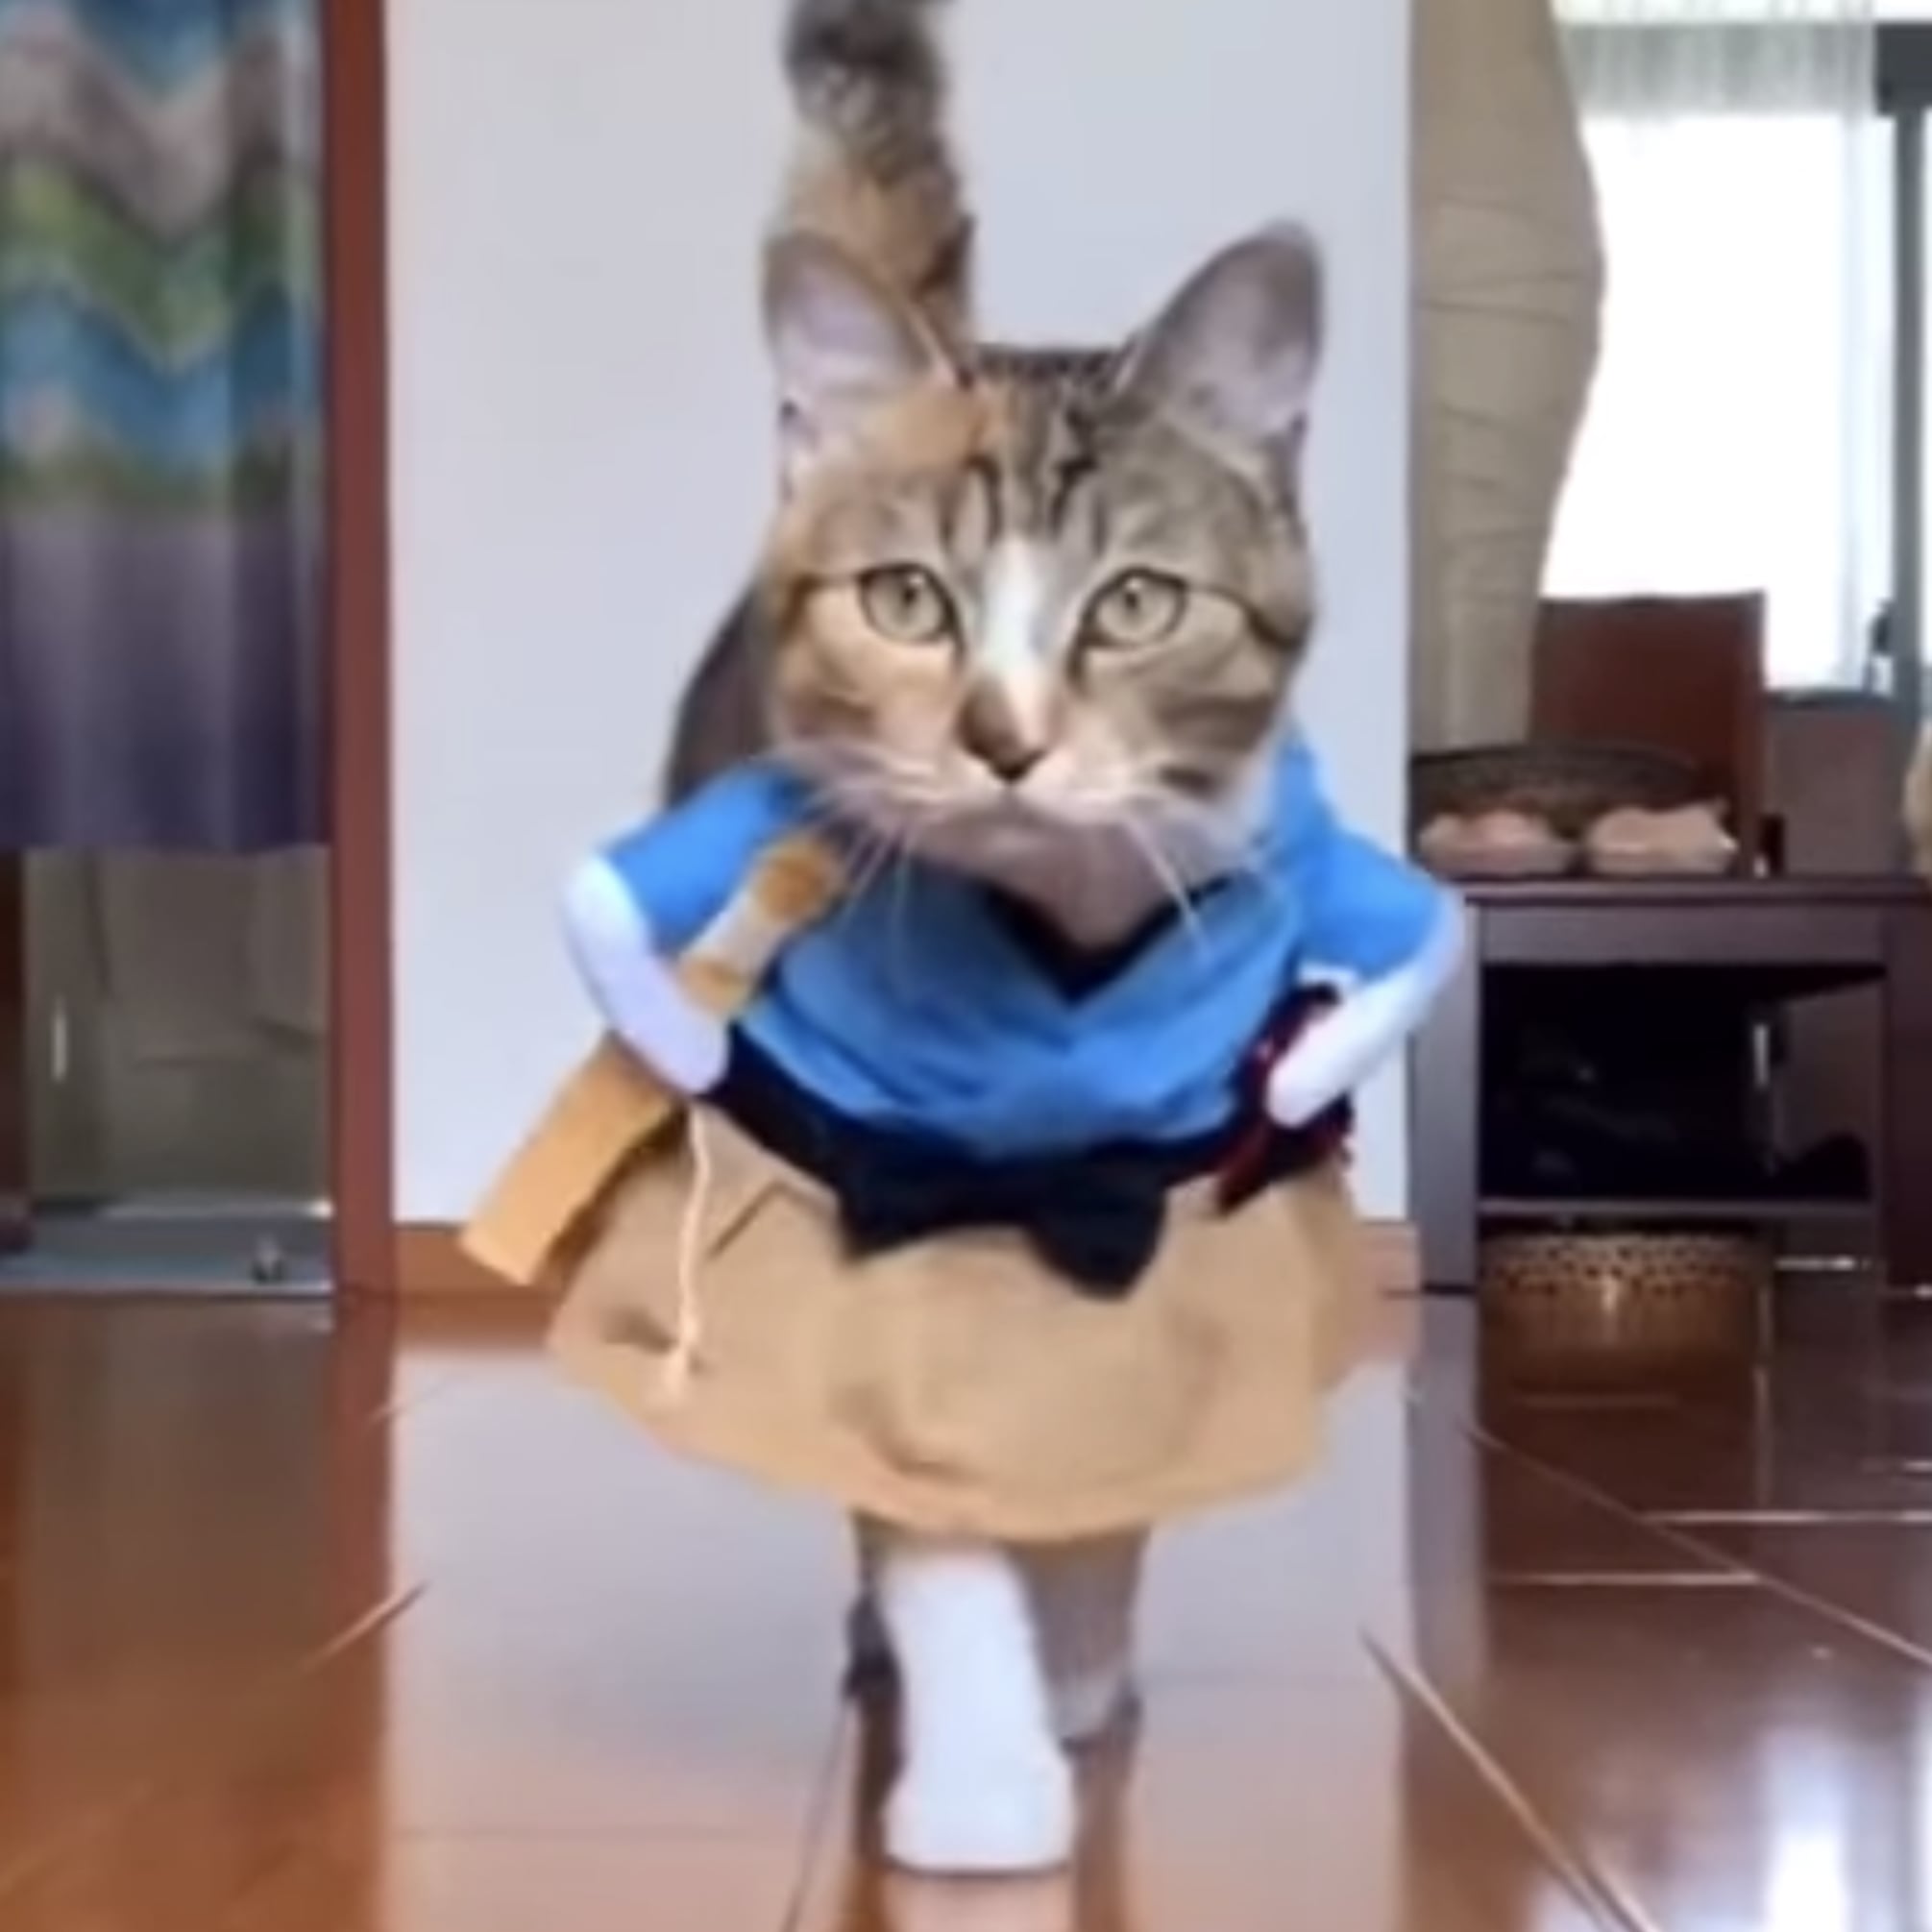 cats wearing clothes